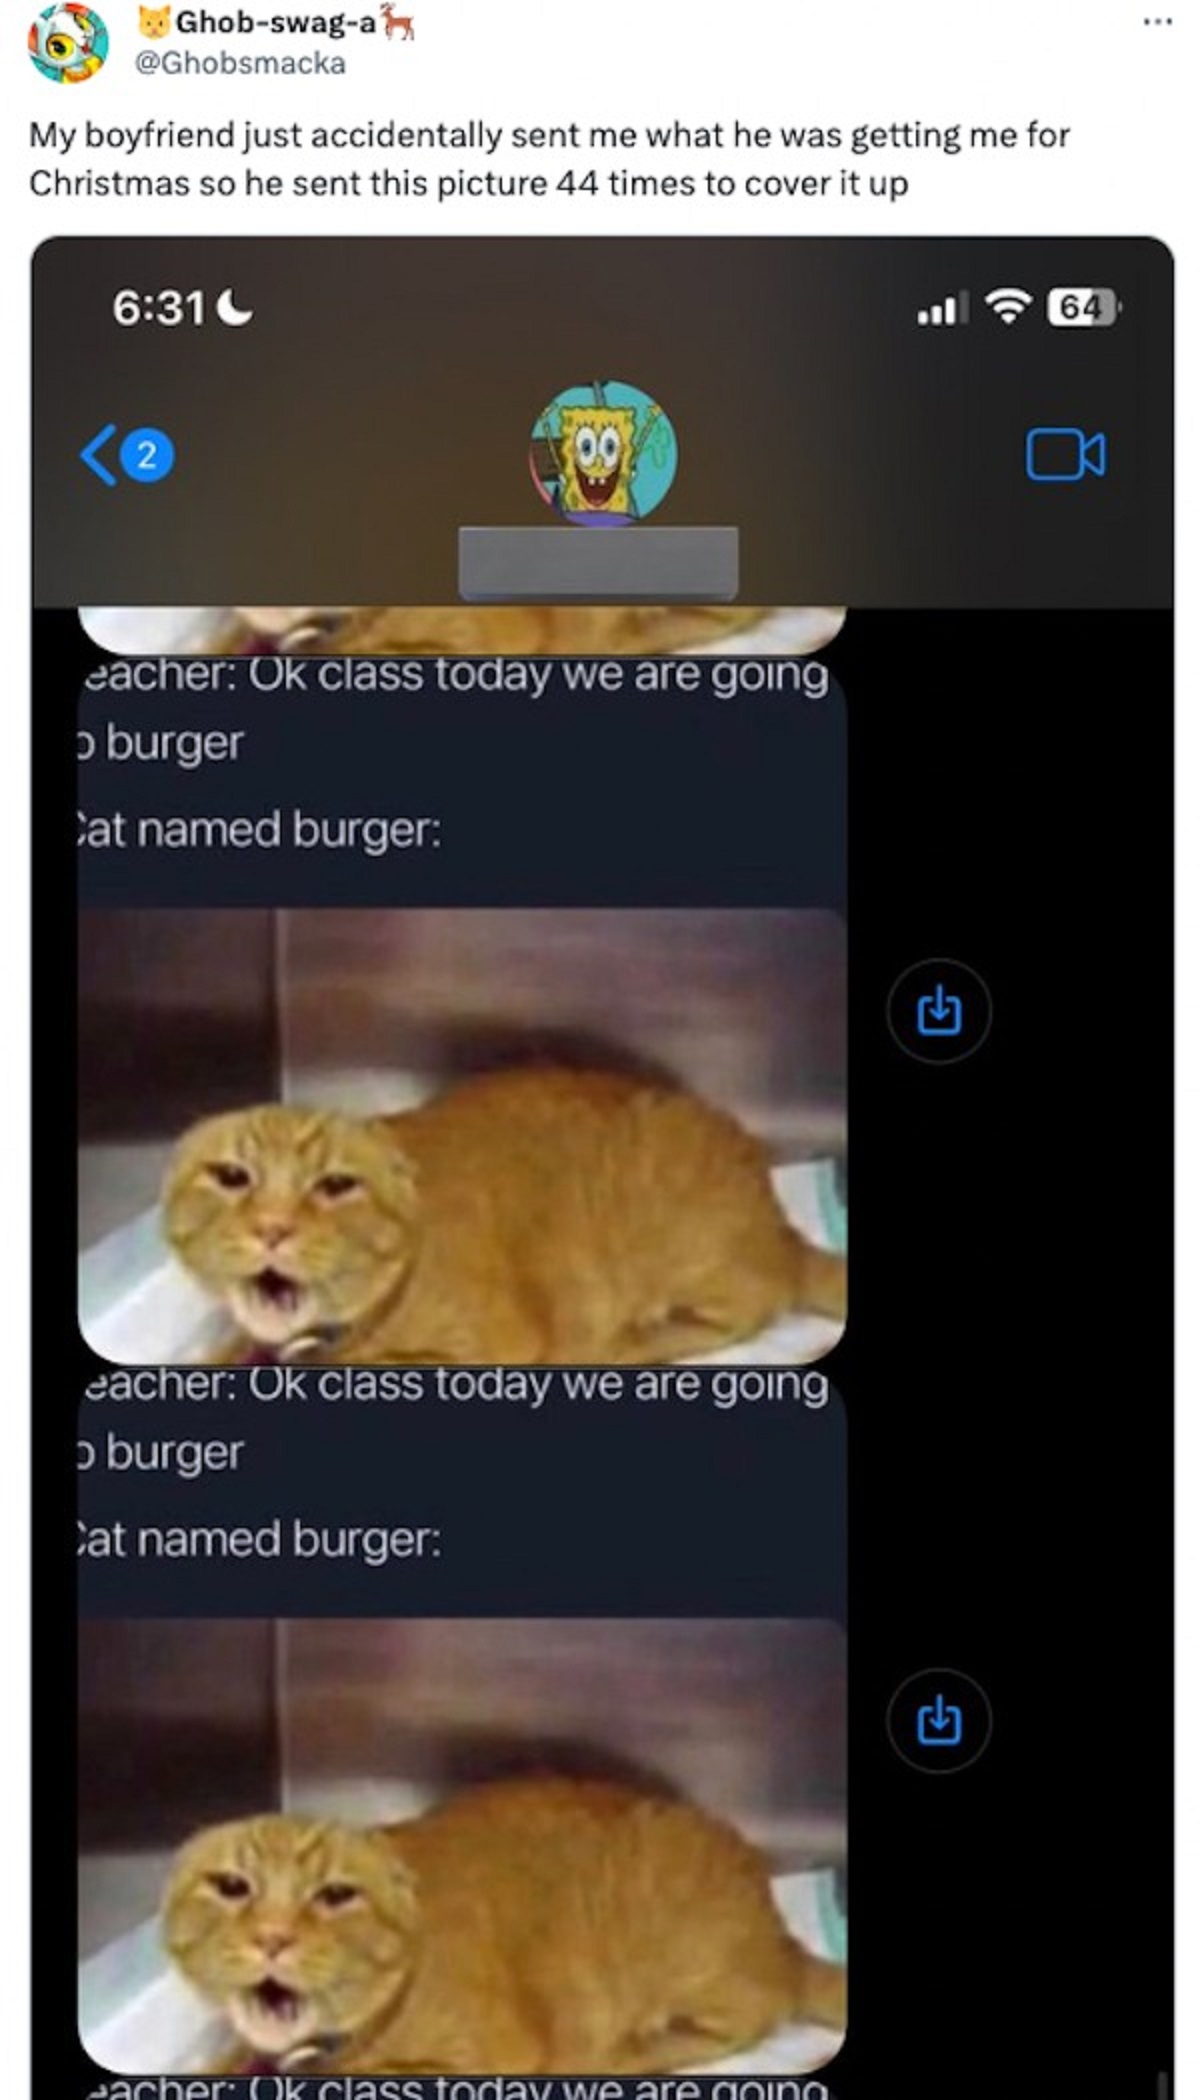 cat - Ghobswaga My boyfriend just accidentally sent me what he was getting me for Christmas so he sent this picture 44 times to cover it up 2 00 eacher Ok class today we are going o burger at named burger eacher Ok class today we are going o burger at nam